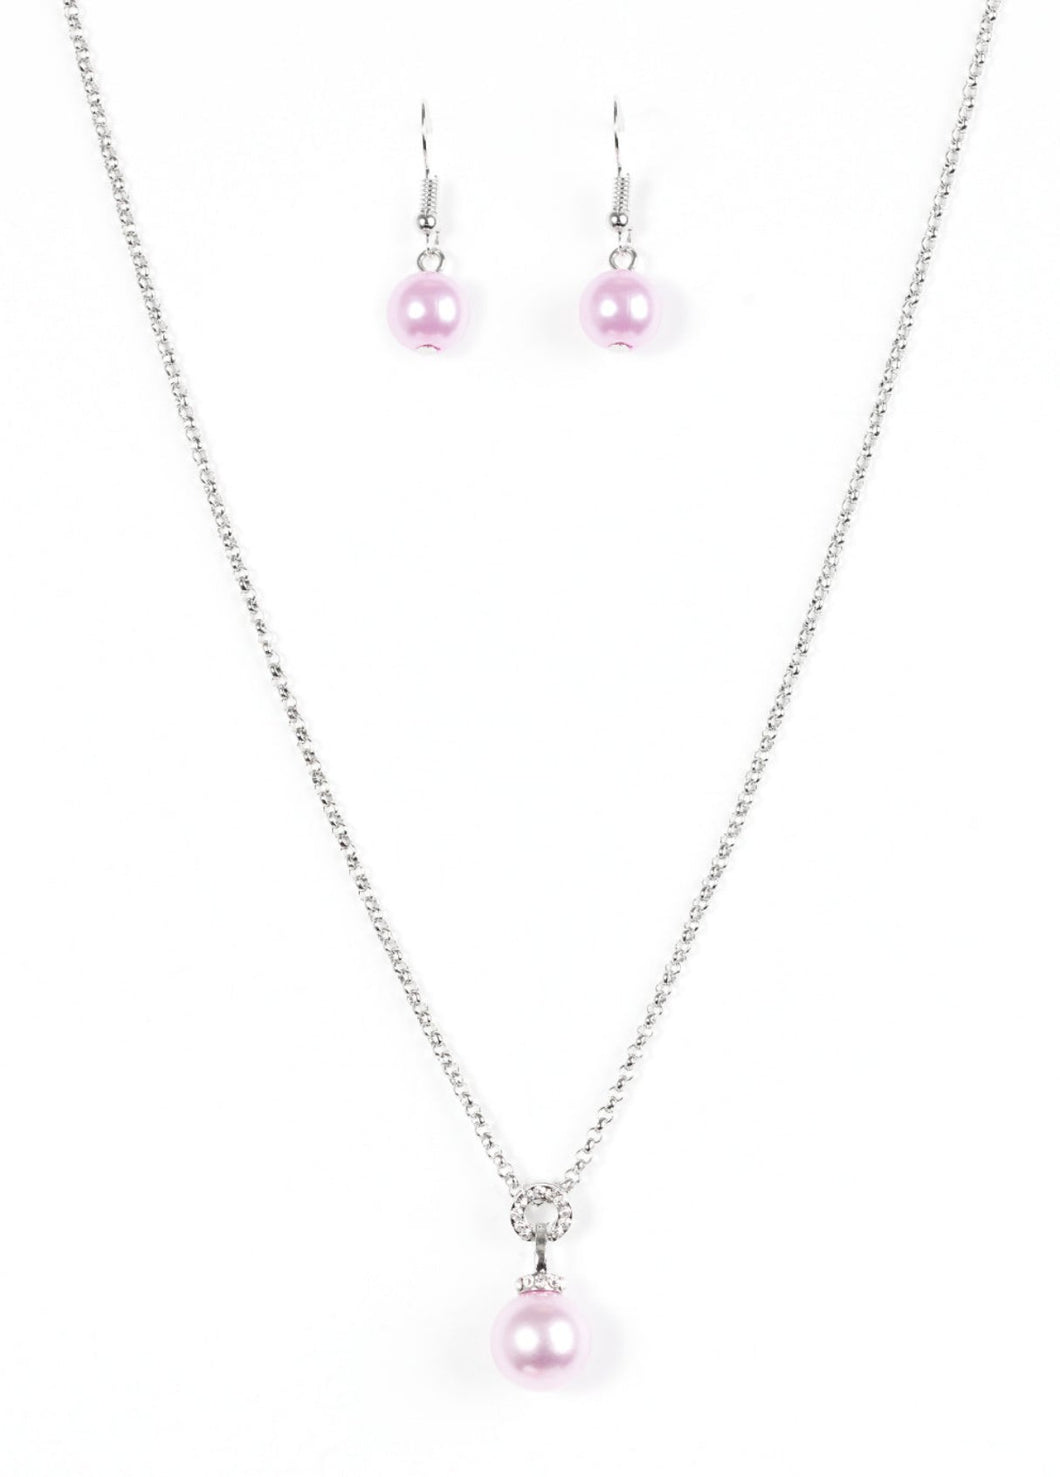 Glamour Girl Purple Pearl Necklace and Earrings